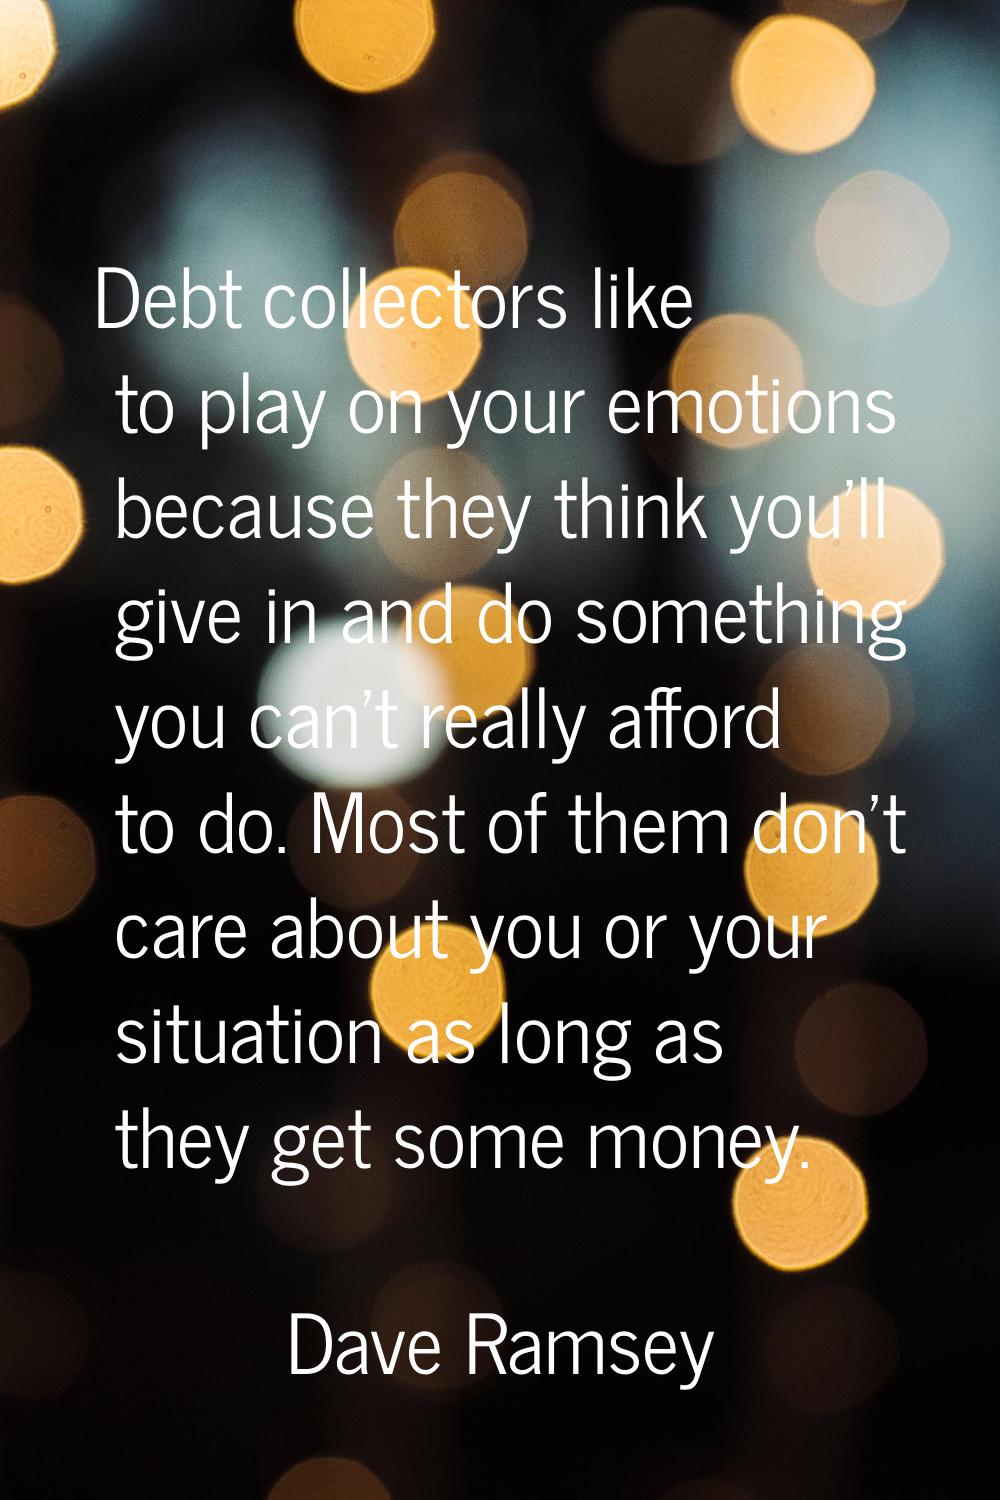 Debt collectors like to play on your emotions because they think you'll give in and do something yo